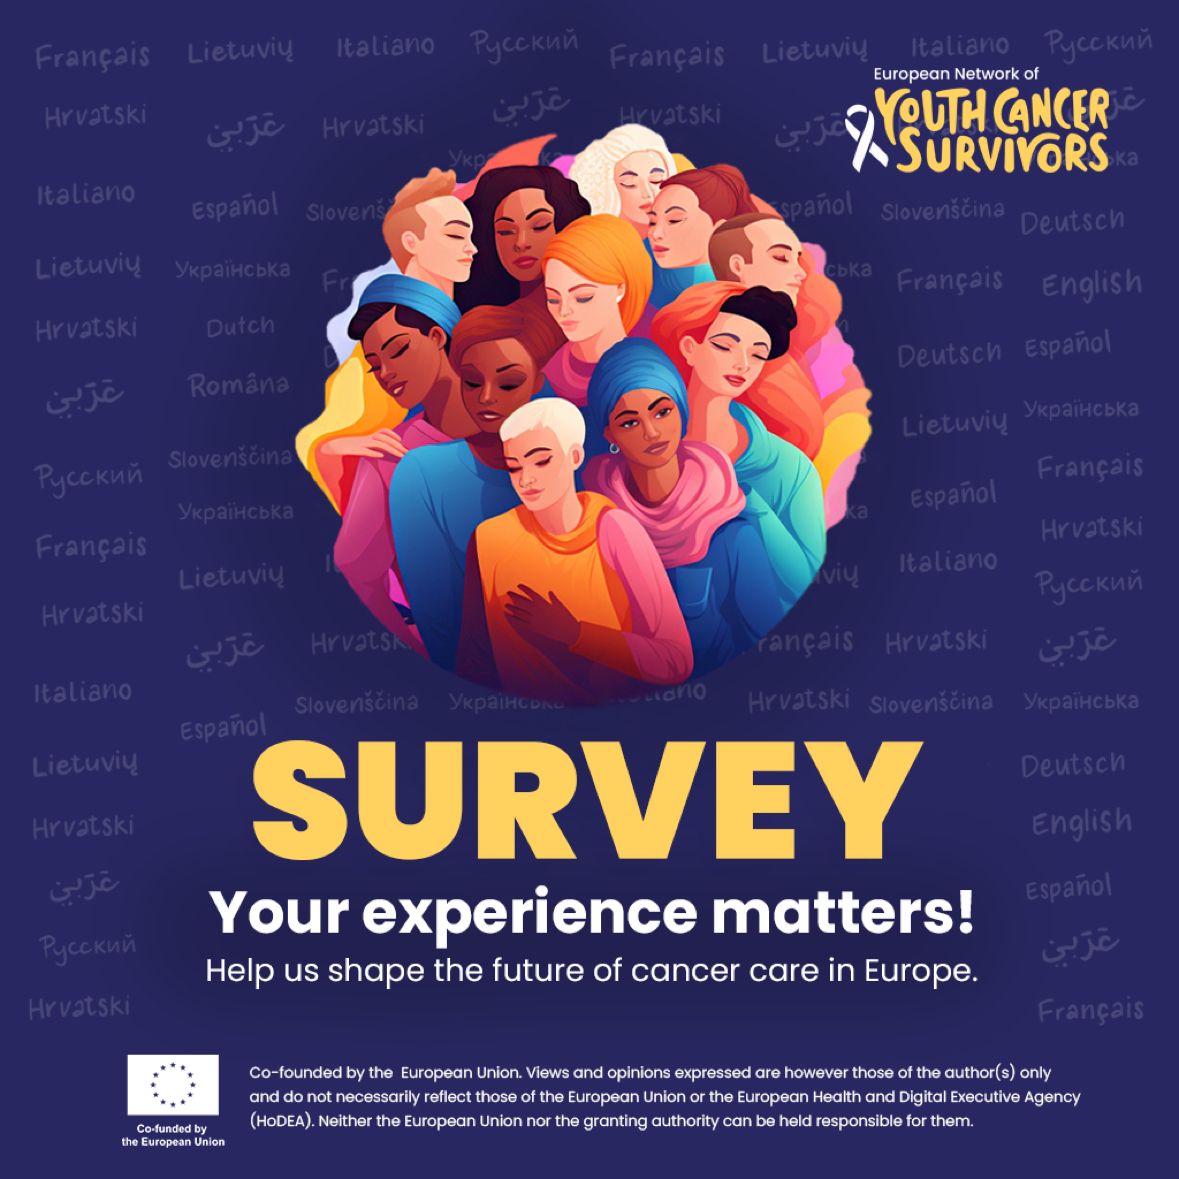 If you know someone diagnosed with cancer before turning 39 and living in Europe, please share the survey with them – Youth Cancer Europe